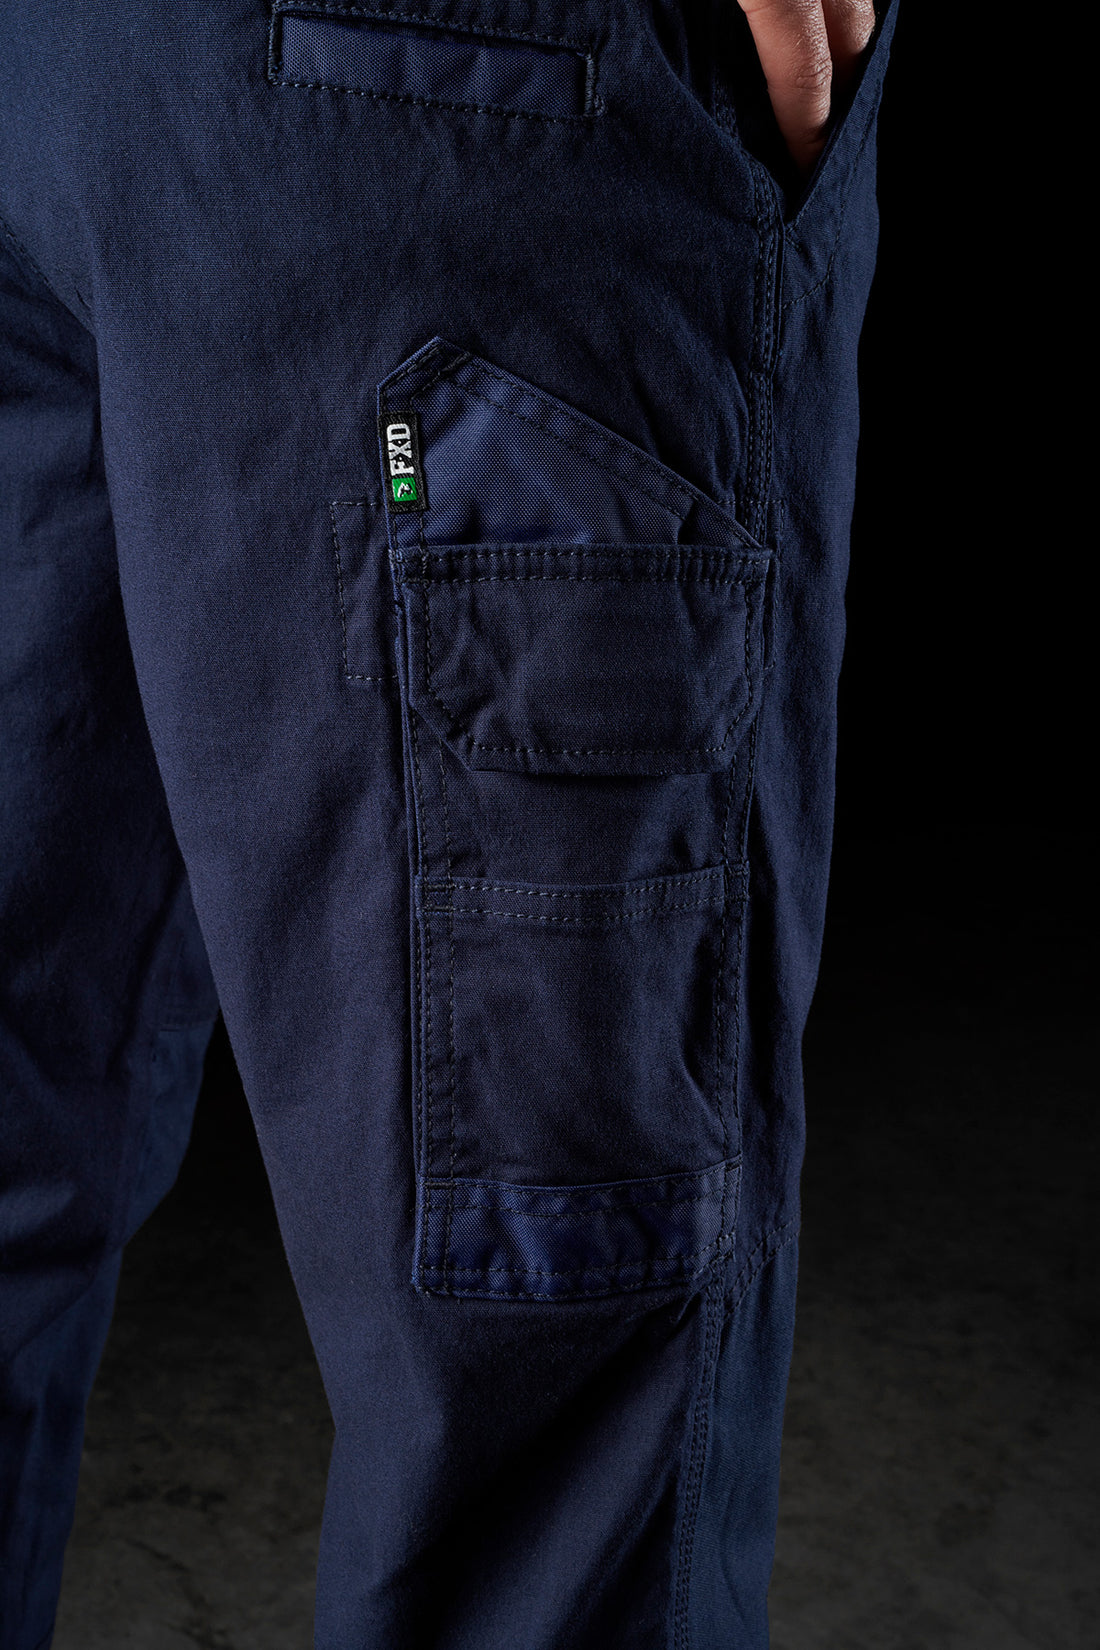 FXD WP3 STRETCH WORK PANTS NAVY